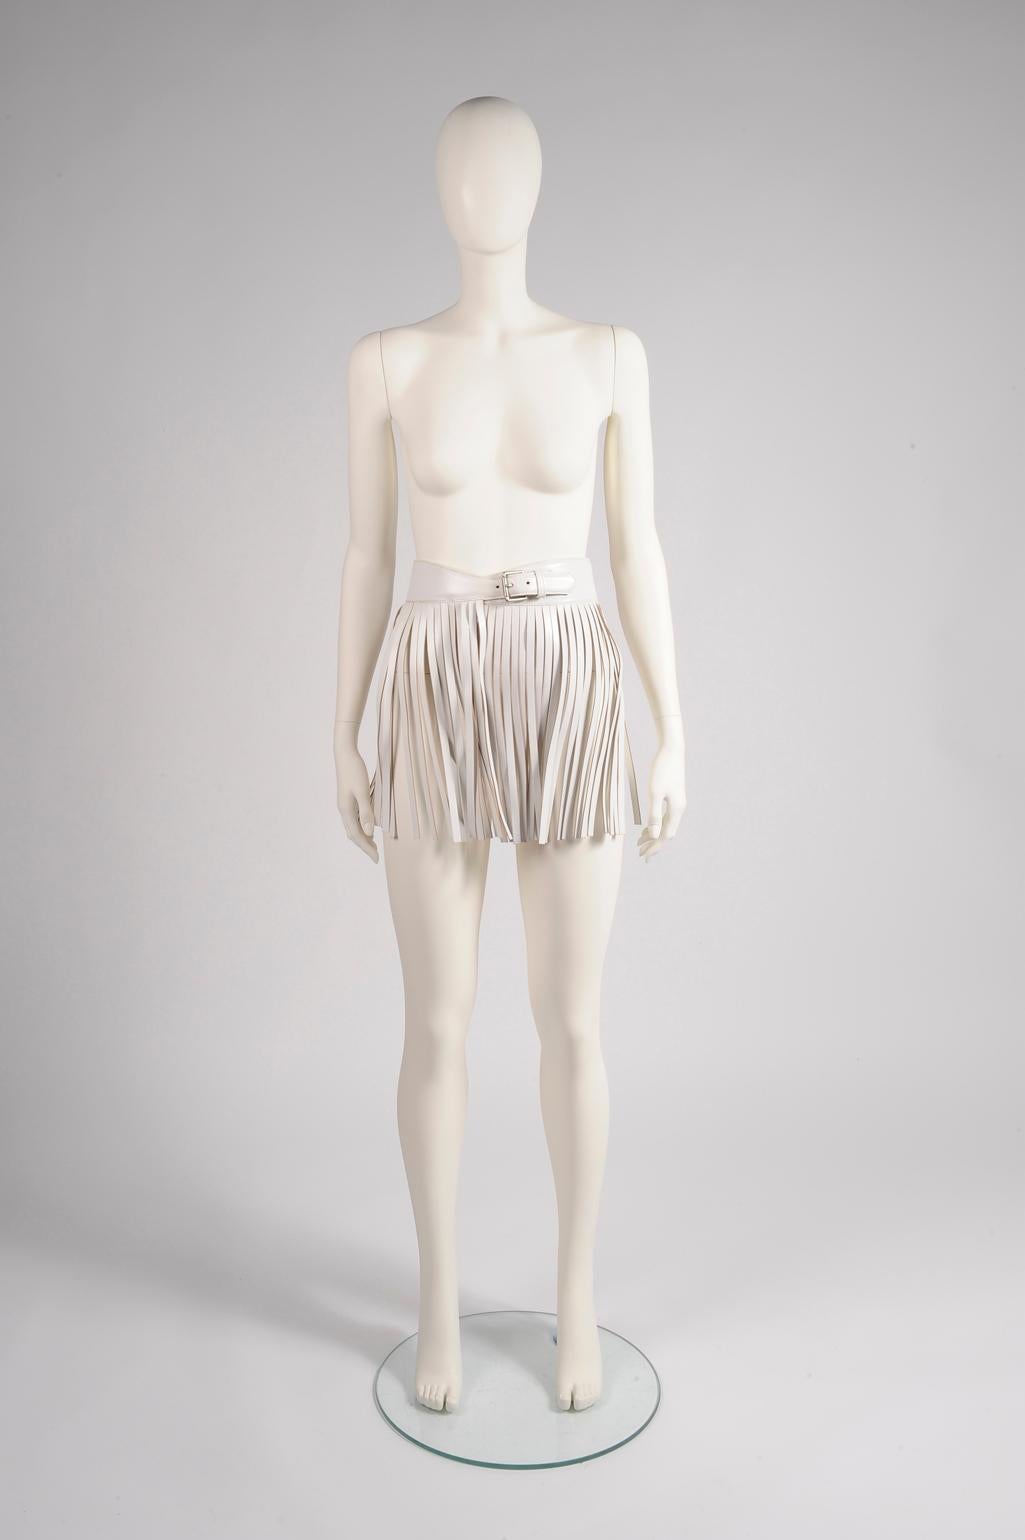 Designed to be worn on the waist, iconic Alaïa white leather fringed belt. Serena Williams was wearing a snakeskin version for Glamour Magazine, July 2016 (see picture 3). Size 70.

Dimensions (taken flat) :
Width (widest part) approx. 5.6 cm (2.2